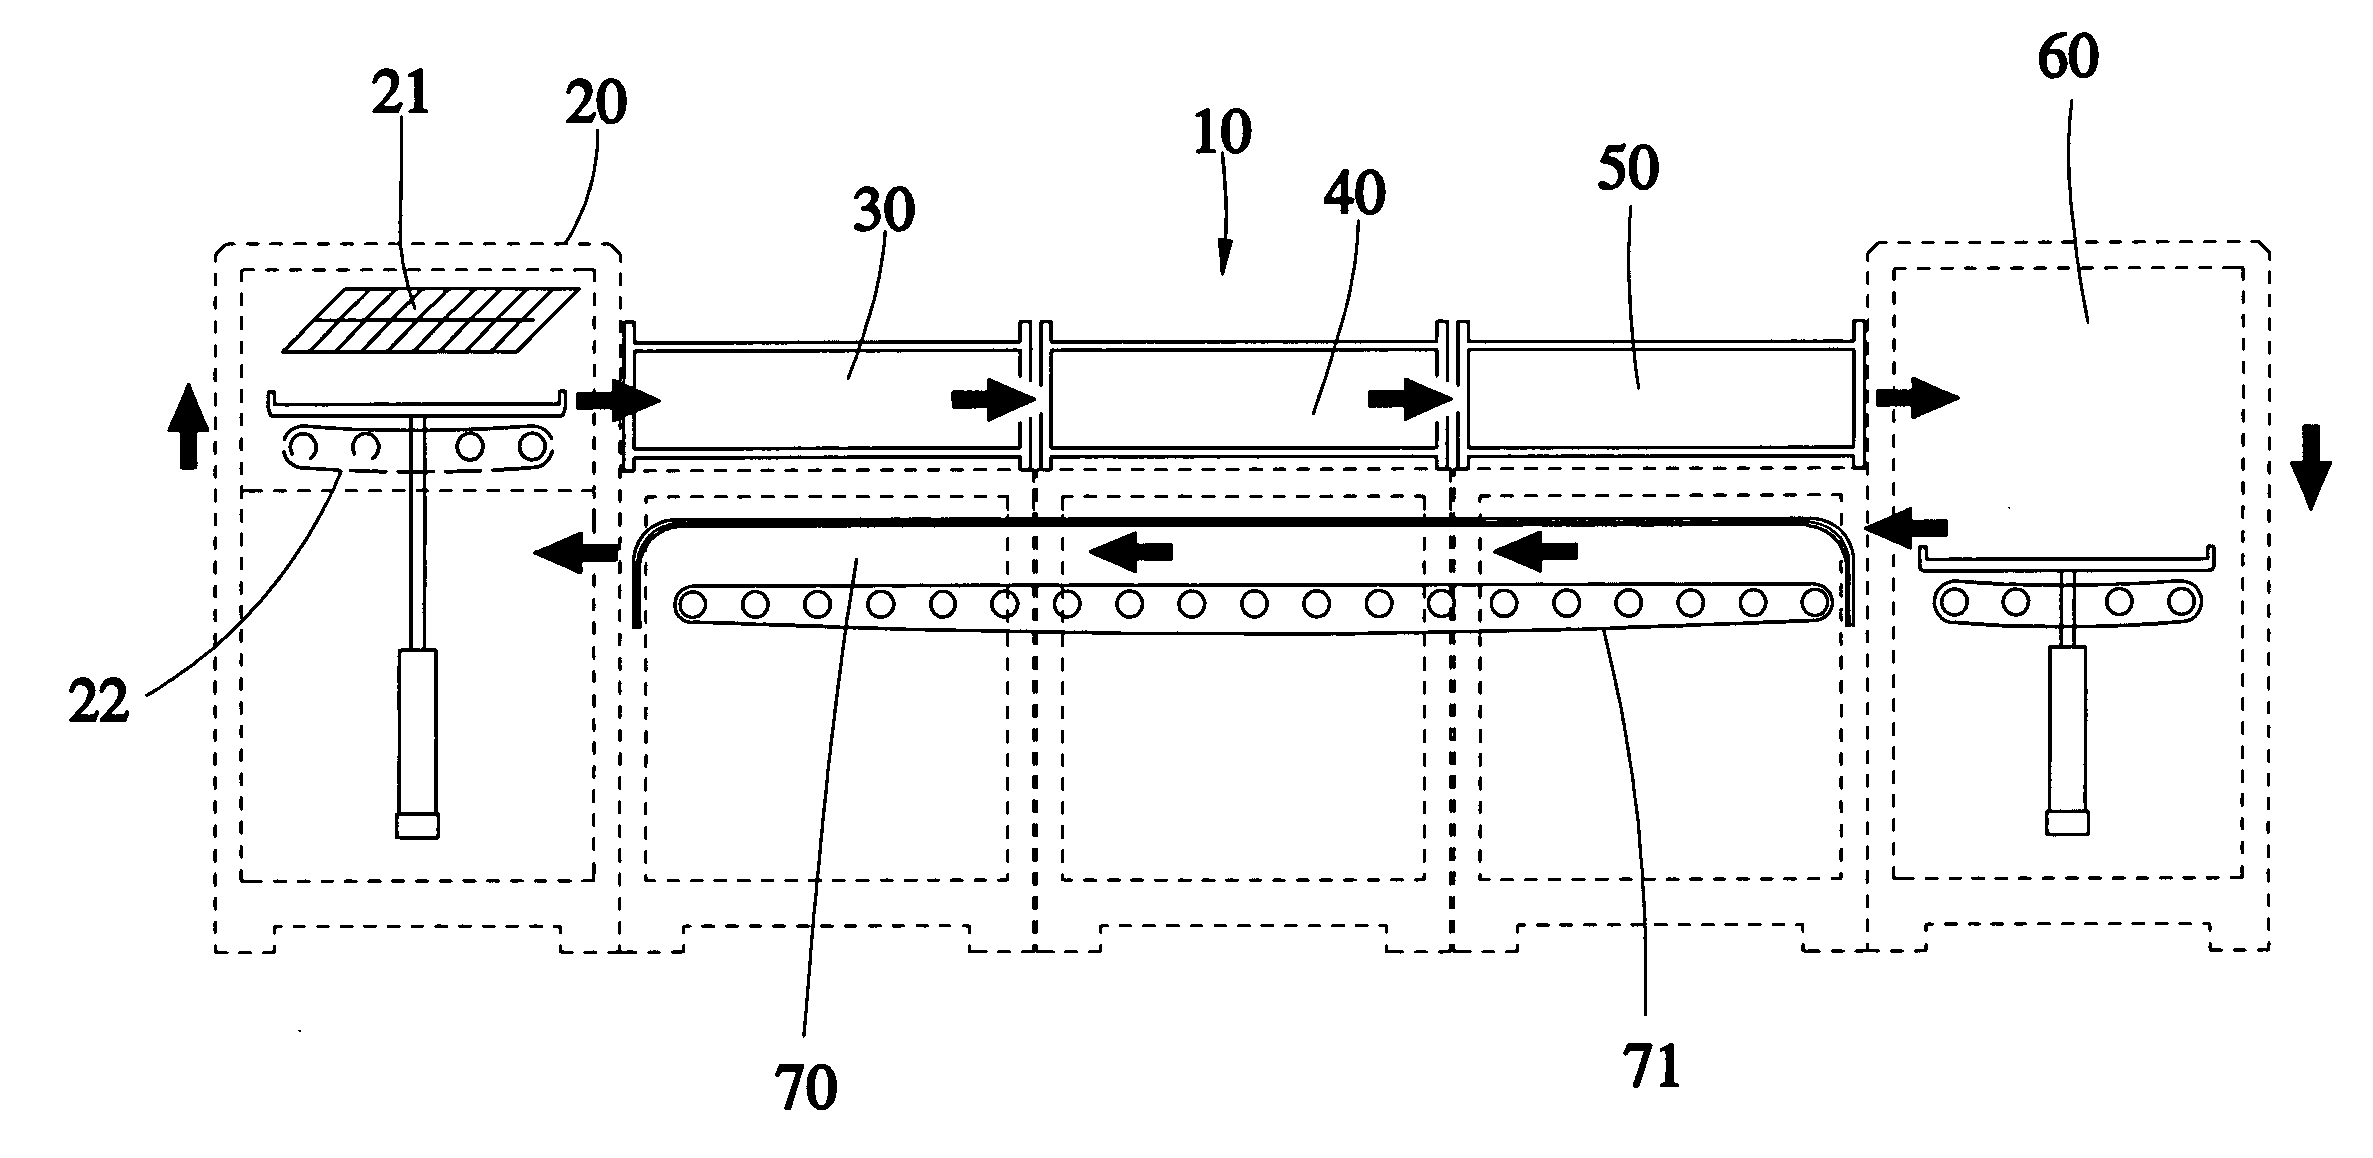 In-line coating/sputtering system with internal static electricity/dust removal and recycle apparatuses